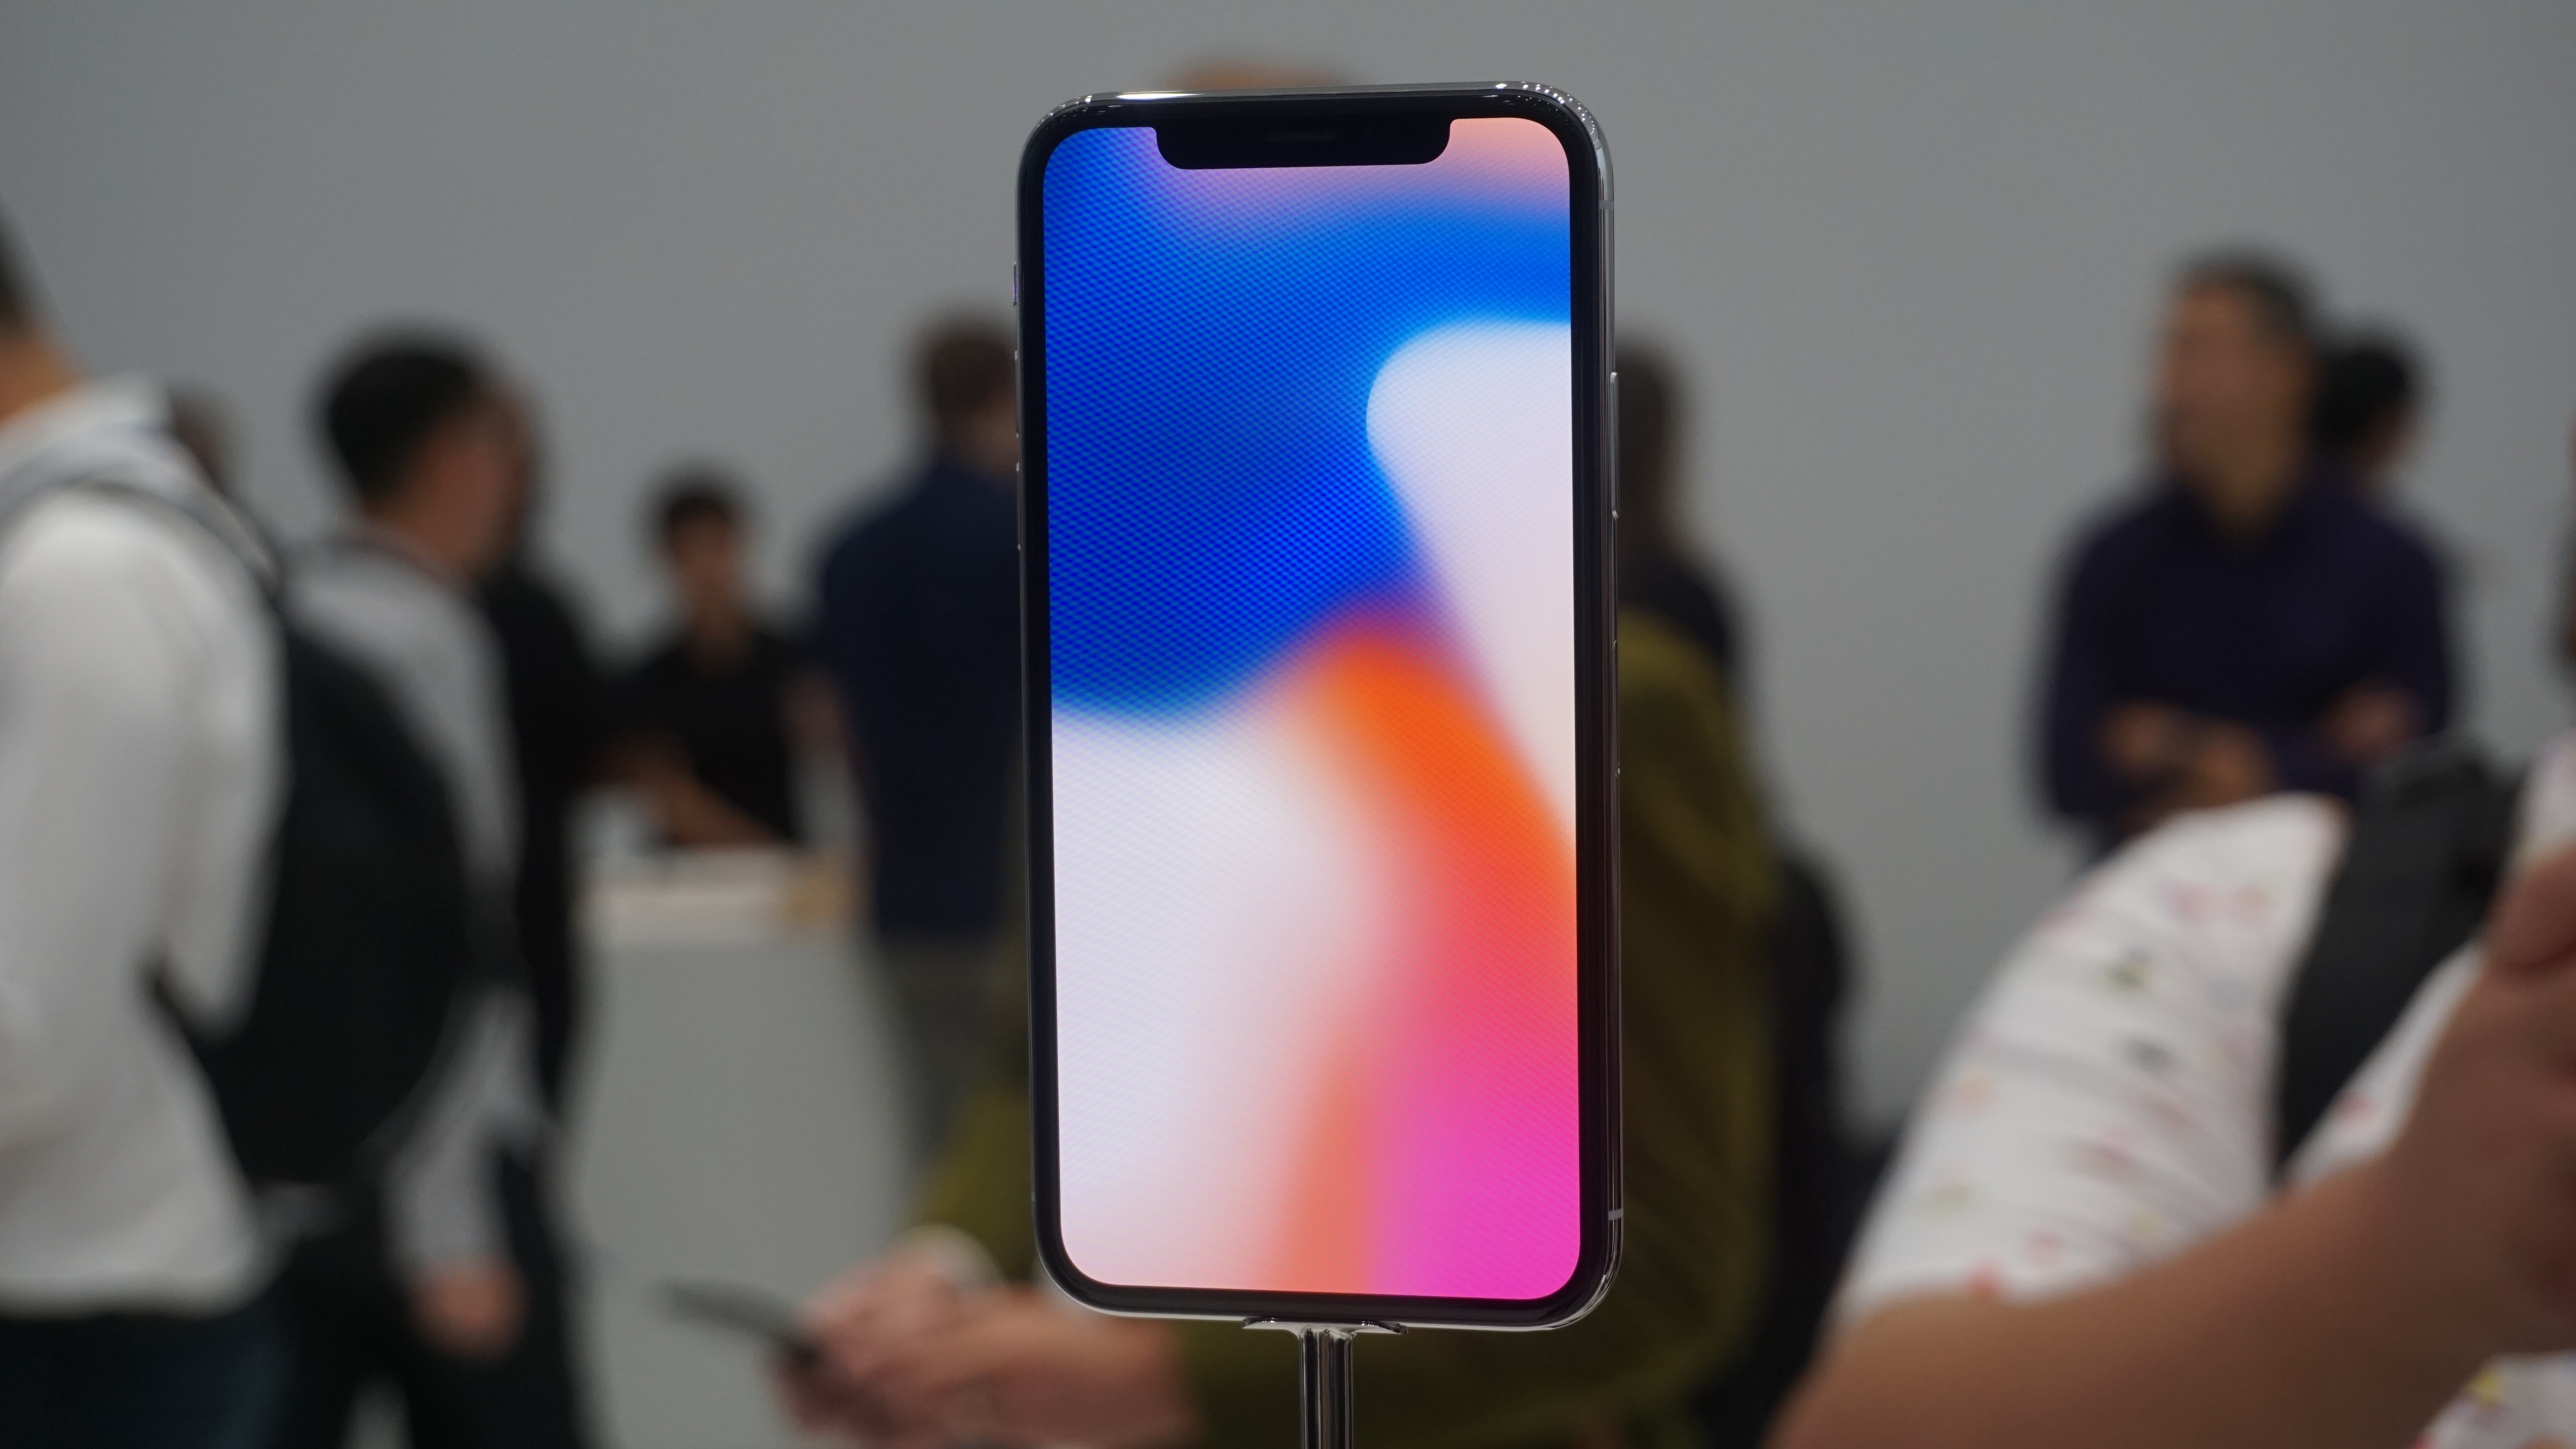 iPhone X vs iPhone 8: What Are the Big Differences?